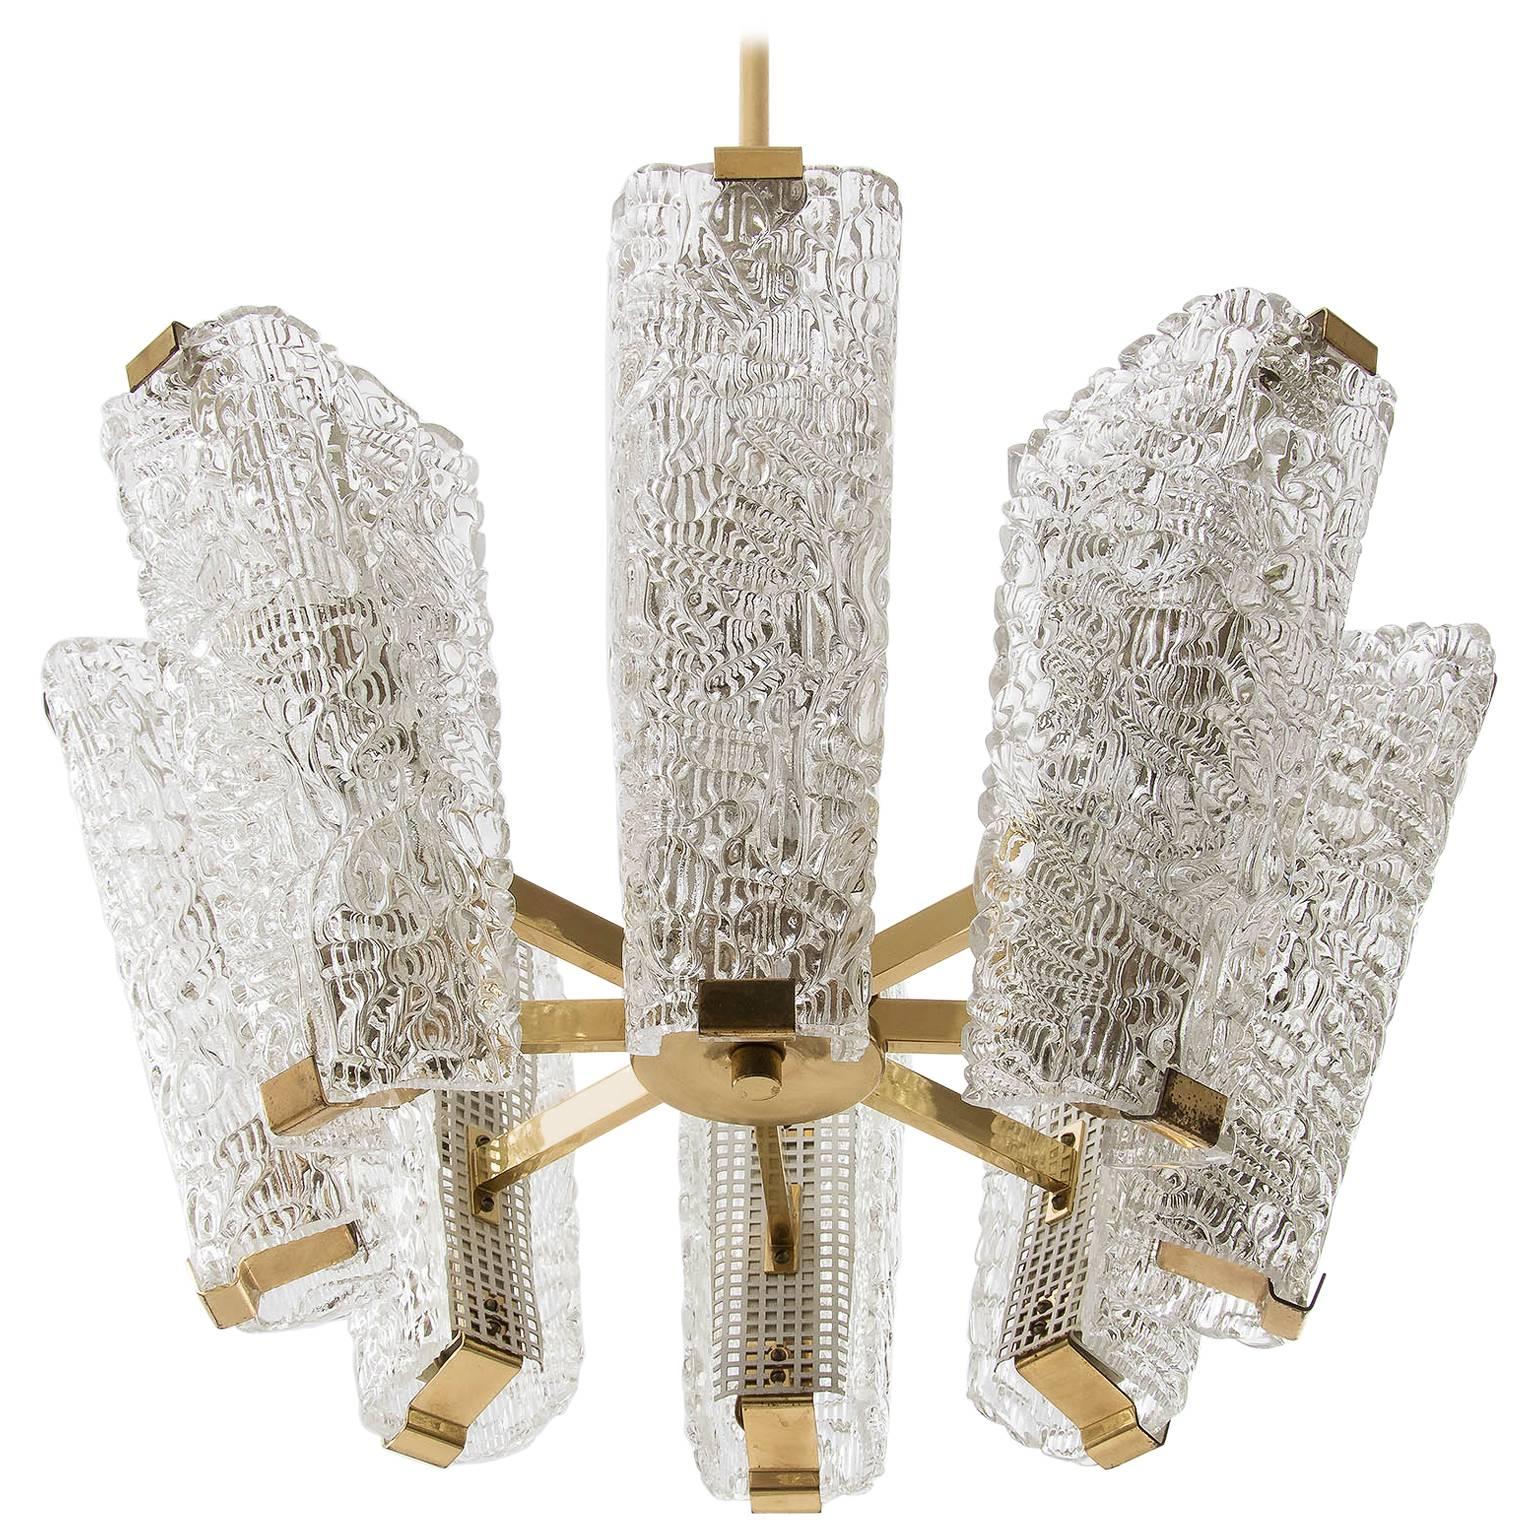 An impressive and large chandeliers by J.T. Kalmar, Austria, manufactured in midcentury, circa 1960 (late 1950s or early 1960s).
The fixture is made of polished brass in a warm tone, textured cast glass and perforated white paint metal.
It has eight